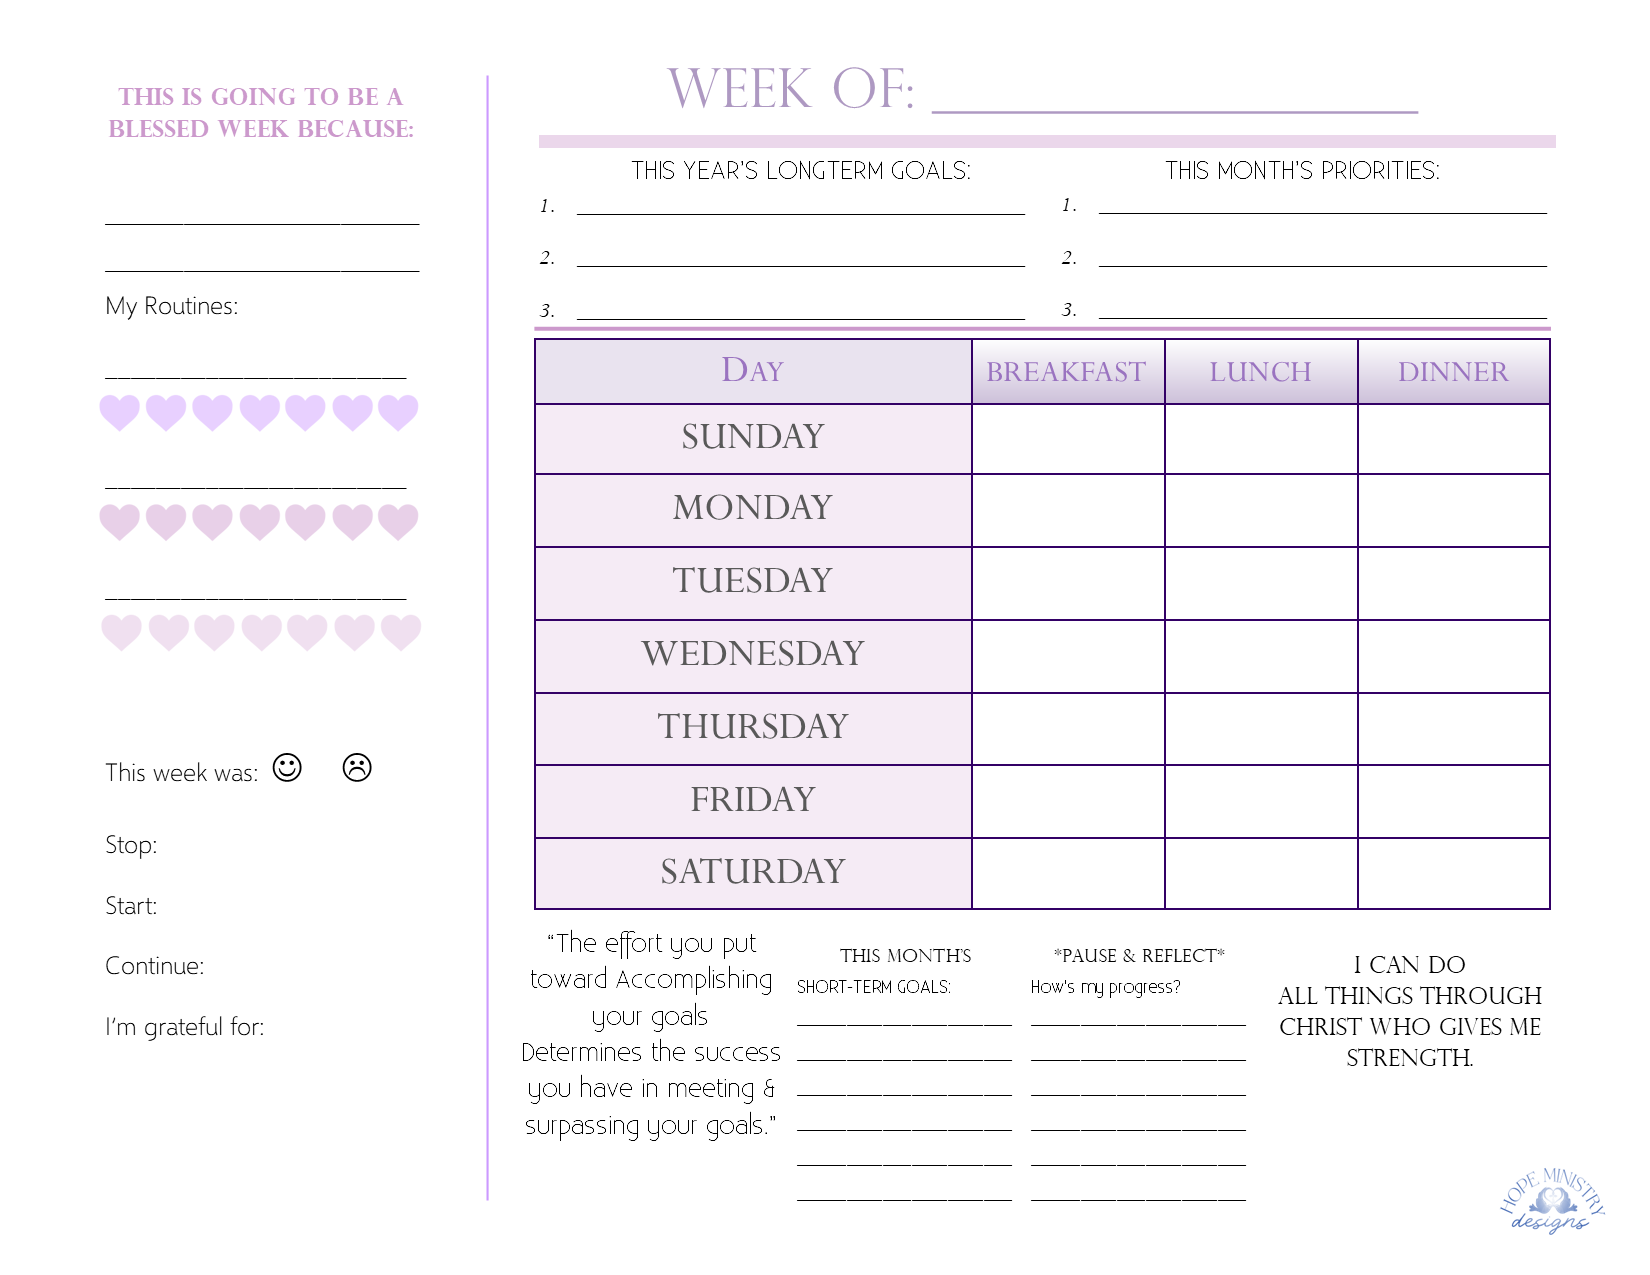 Modern aesthetic weekly goal tracking planner - free download